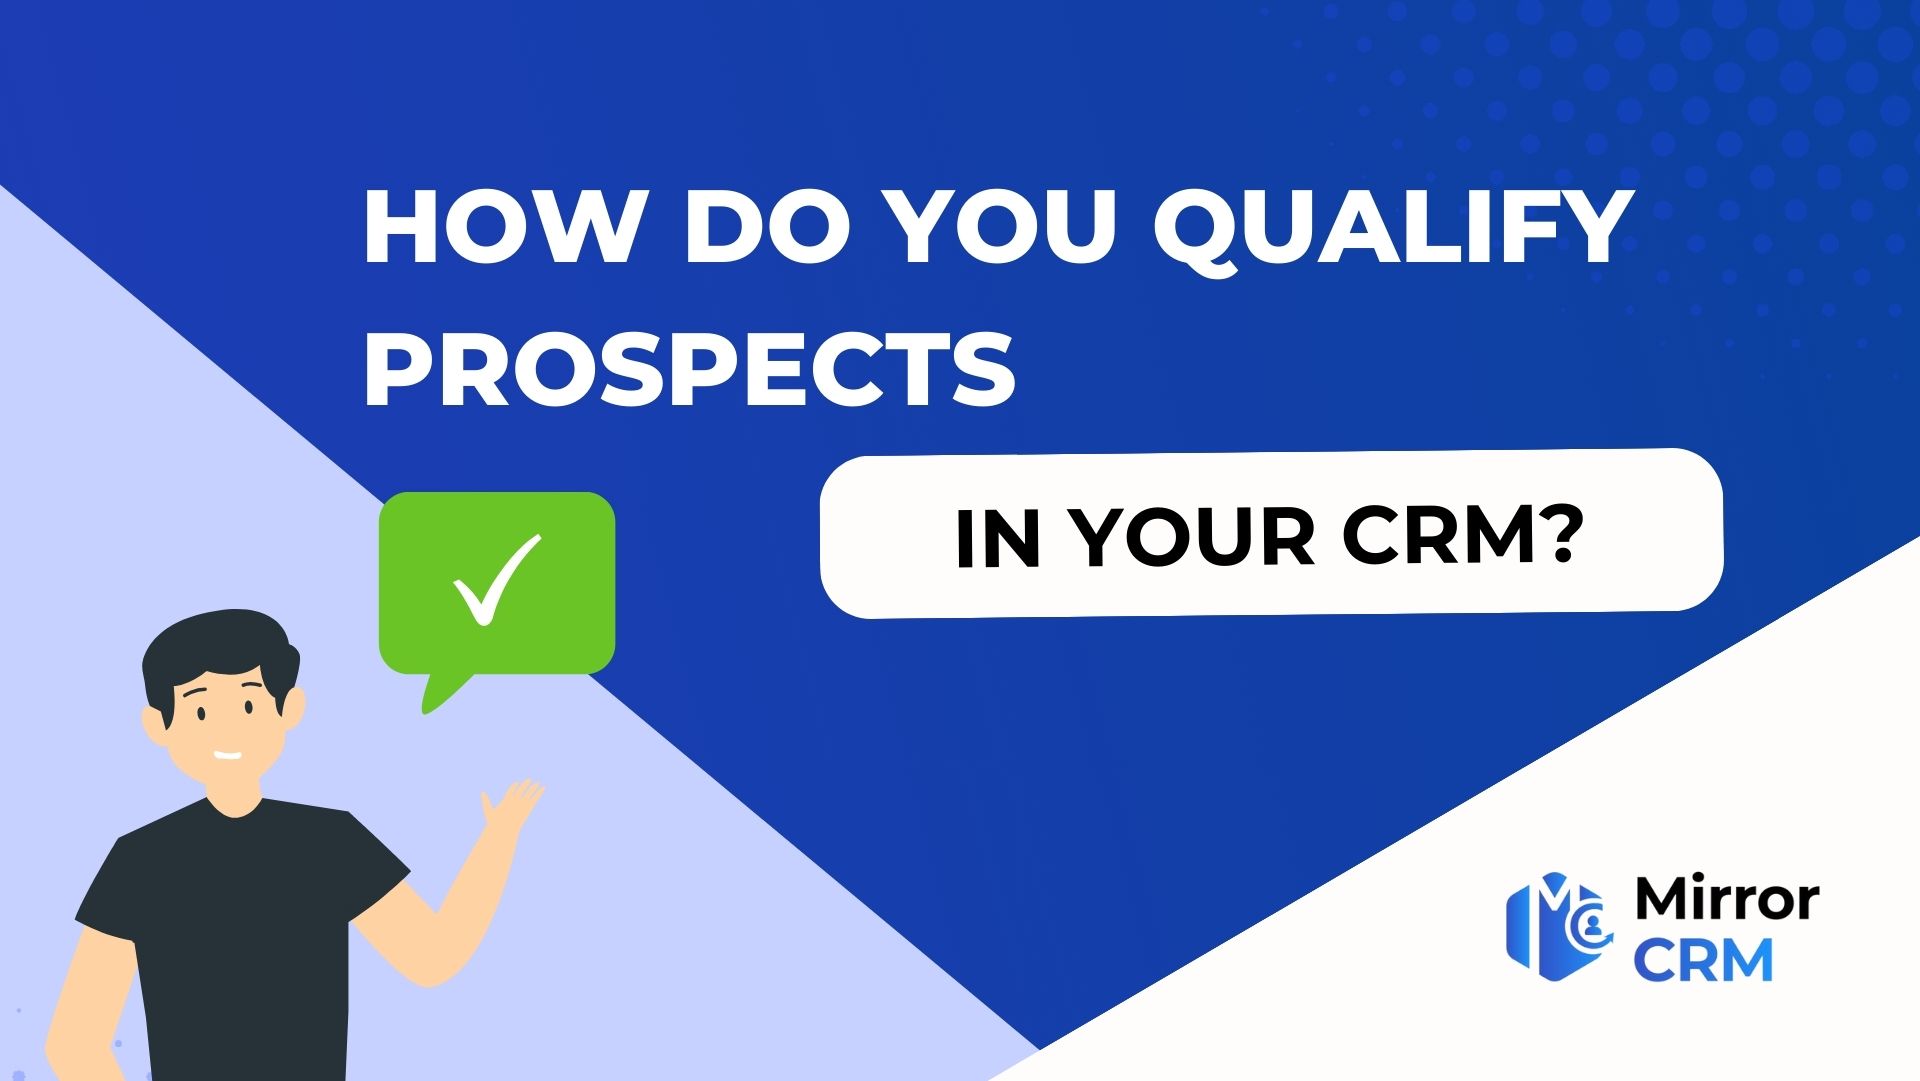 How do you qualify prospects in your CRM?